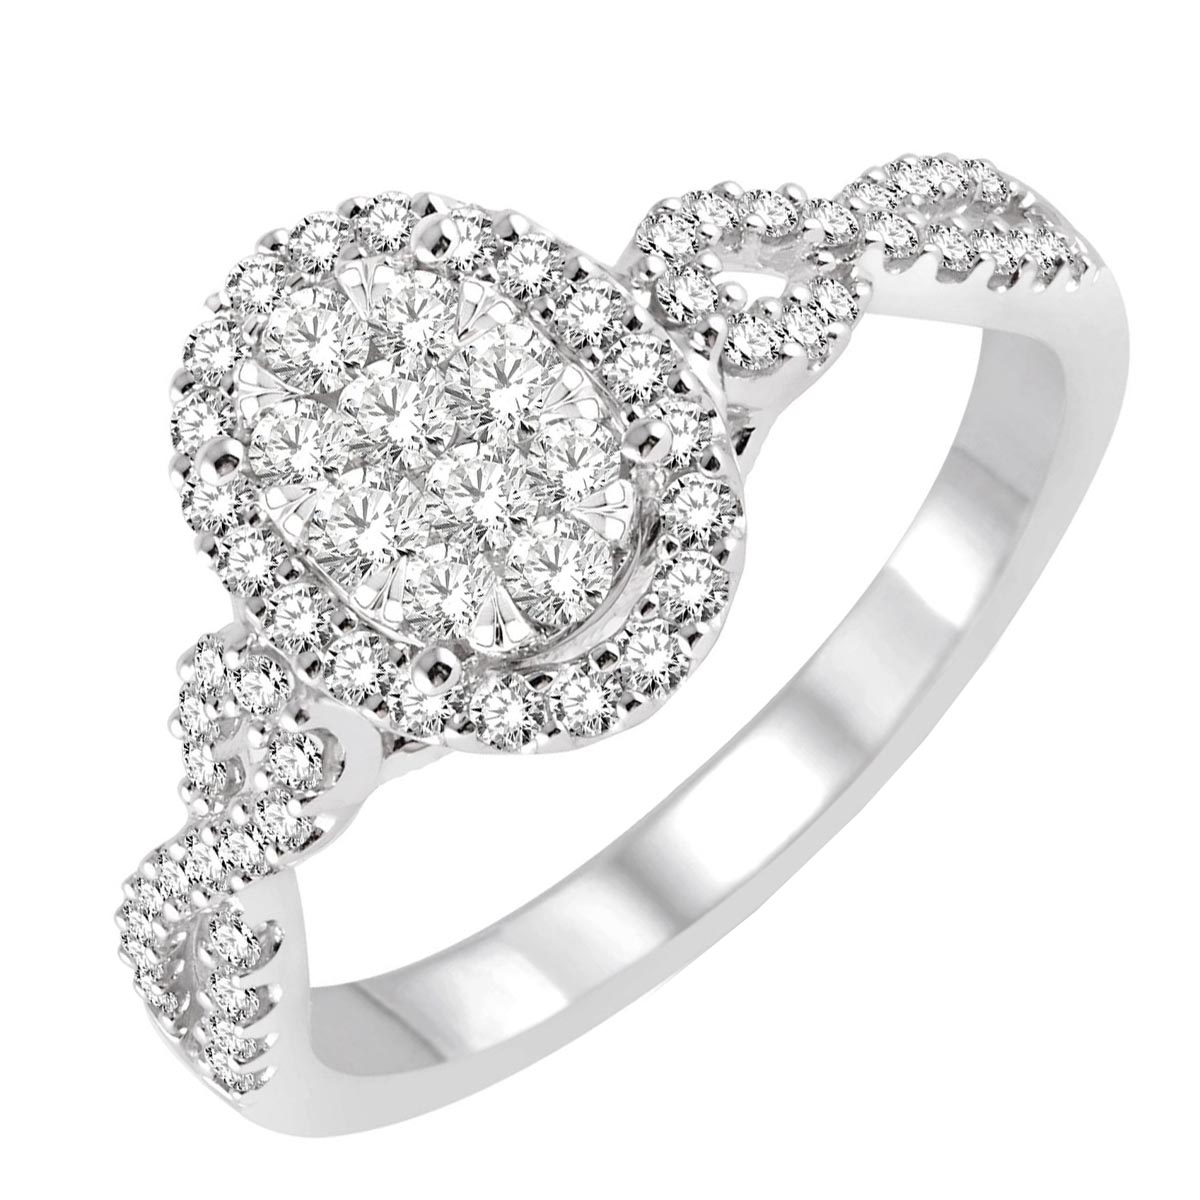 Lovebright Oval Diamond Engagement Ring in 14kt White Gold (5/8ct tw)